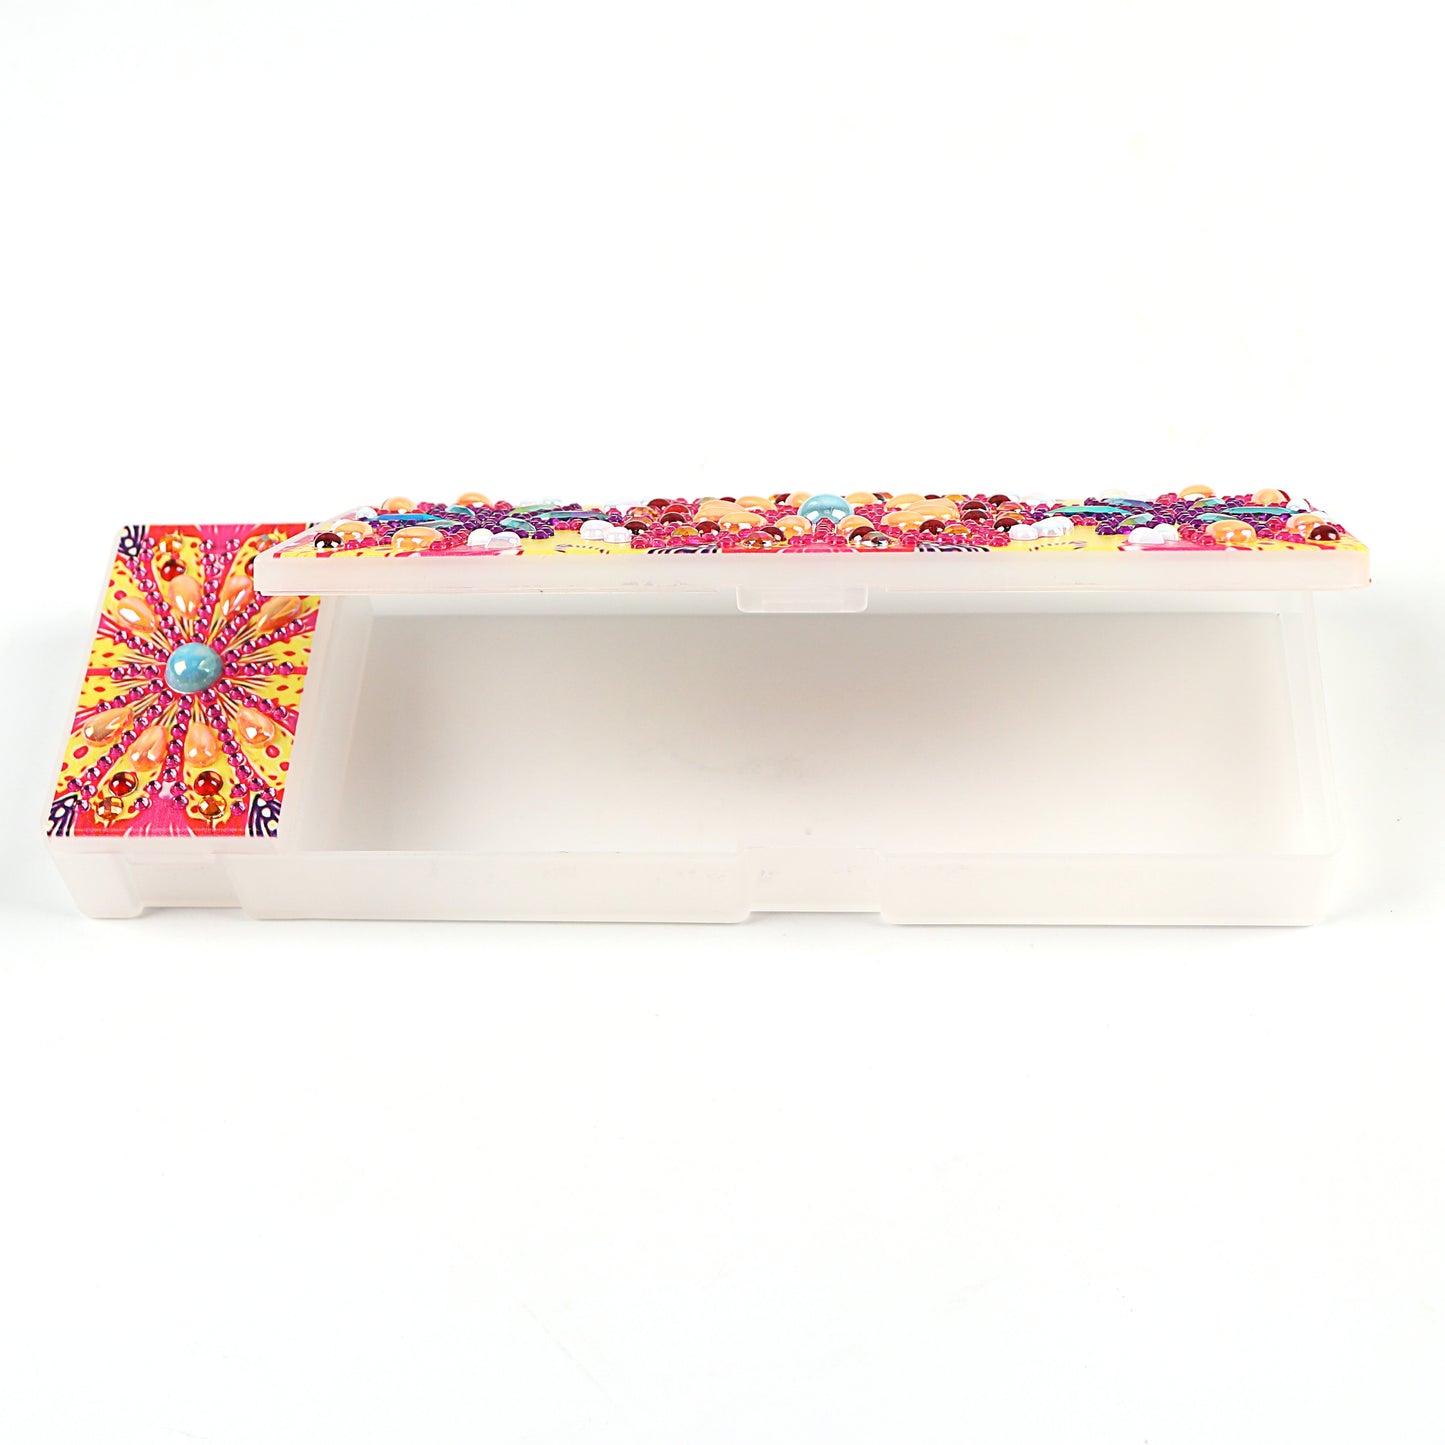 DIY special-shaped diamond painting 2 grid pencil case | Yellow daisy | storage box gift